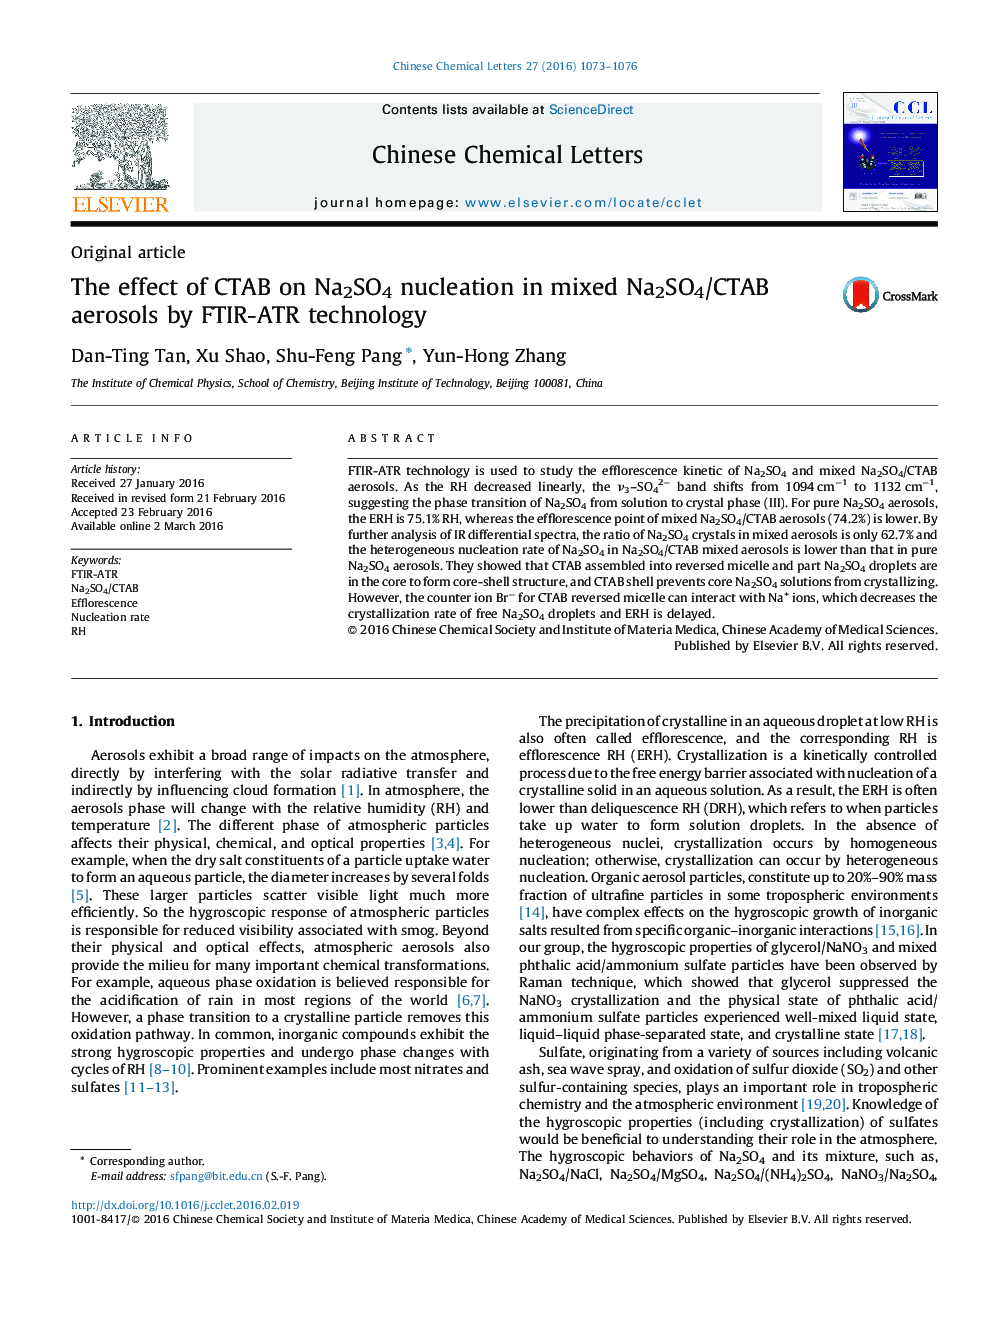 The effect of CTAB on Na2SO4 nucleation in mixed Na2SO4/CTAB aerosols by FTIR-ATR technology